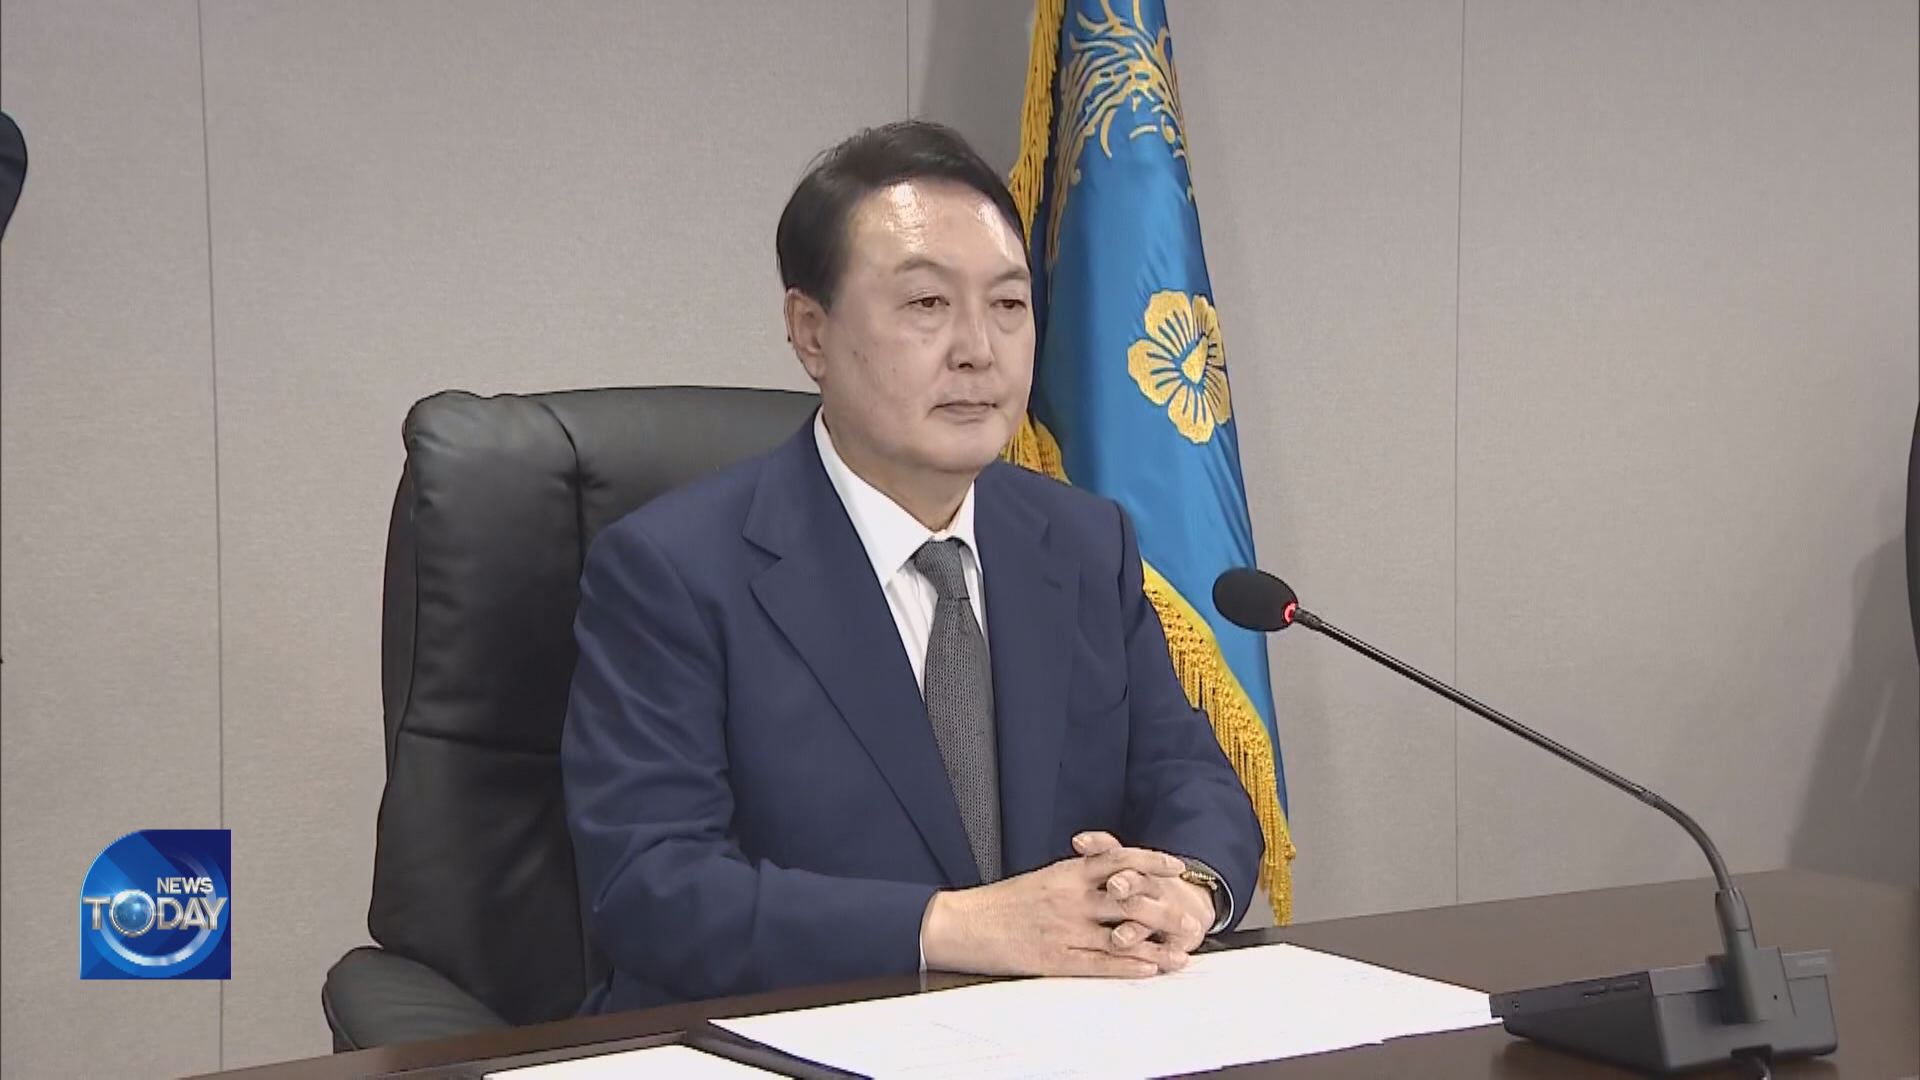 PRESIDENT YOON’S FIRST DAY IN OFFICE